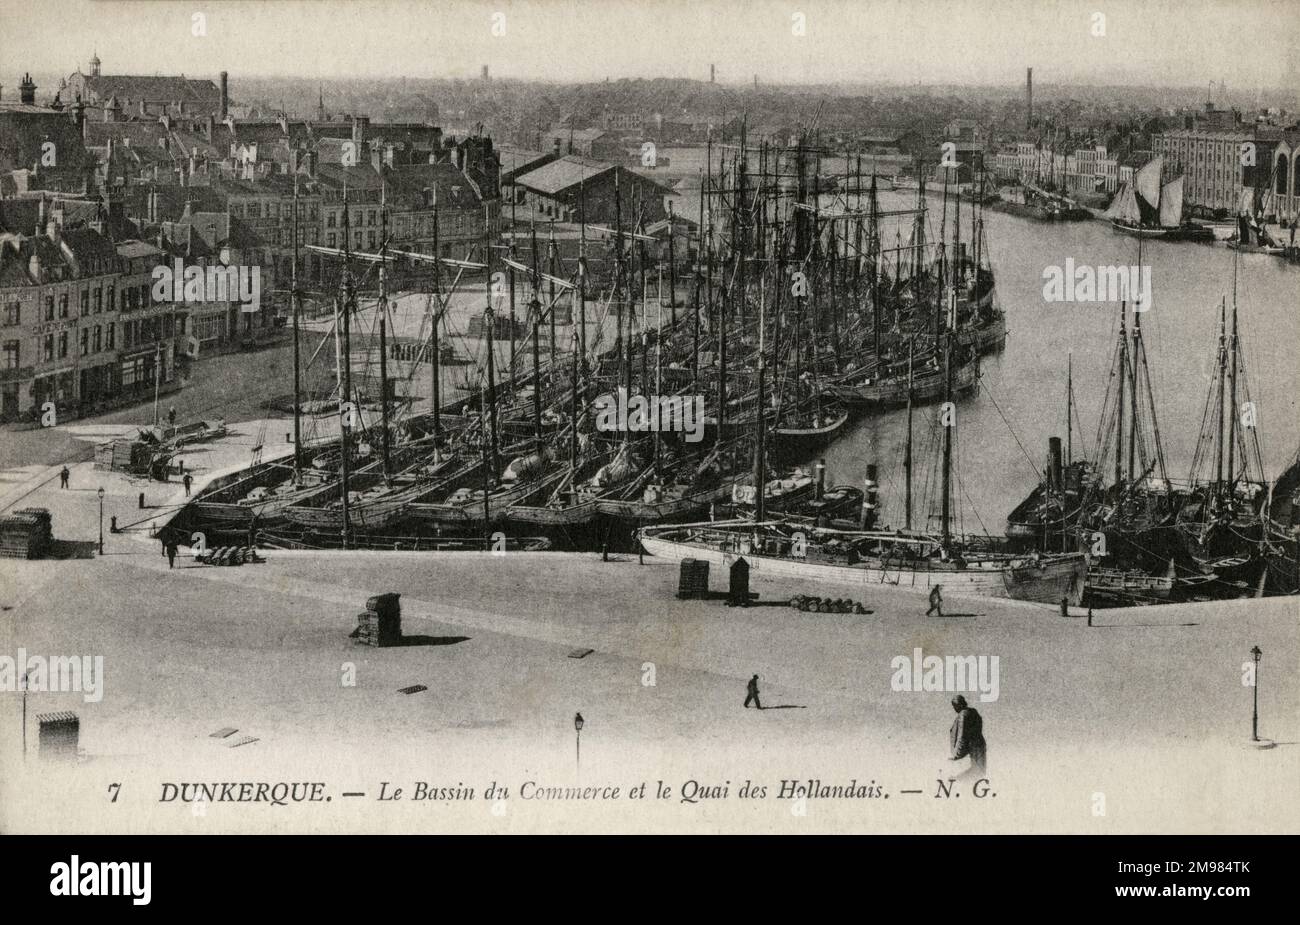 Dunkirk, France - Bassin du Commerce and the Dutch Quay. A harbour packed with sailing boats, a commercial French port and peaceful quayside. Stock Photo